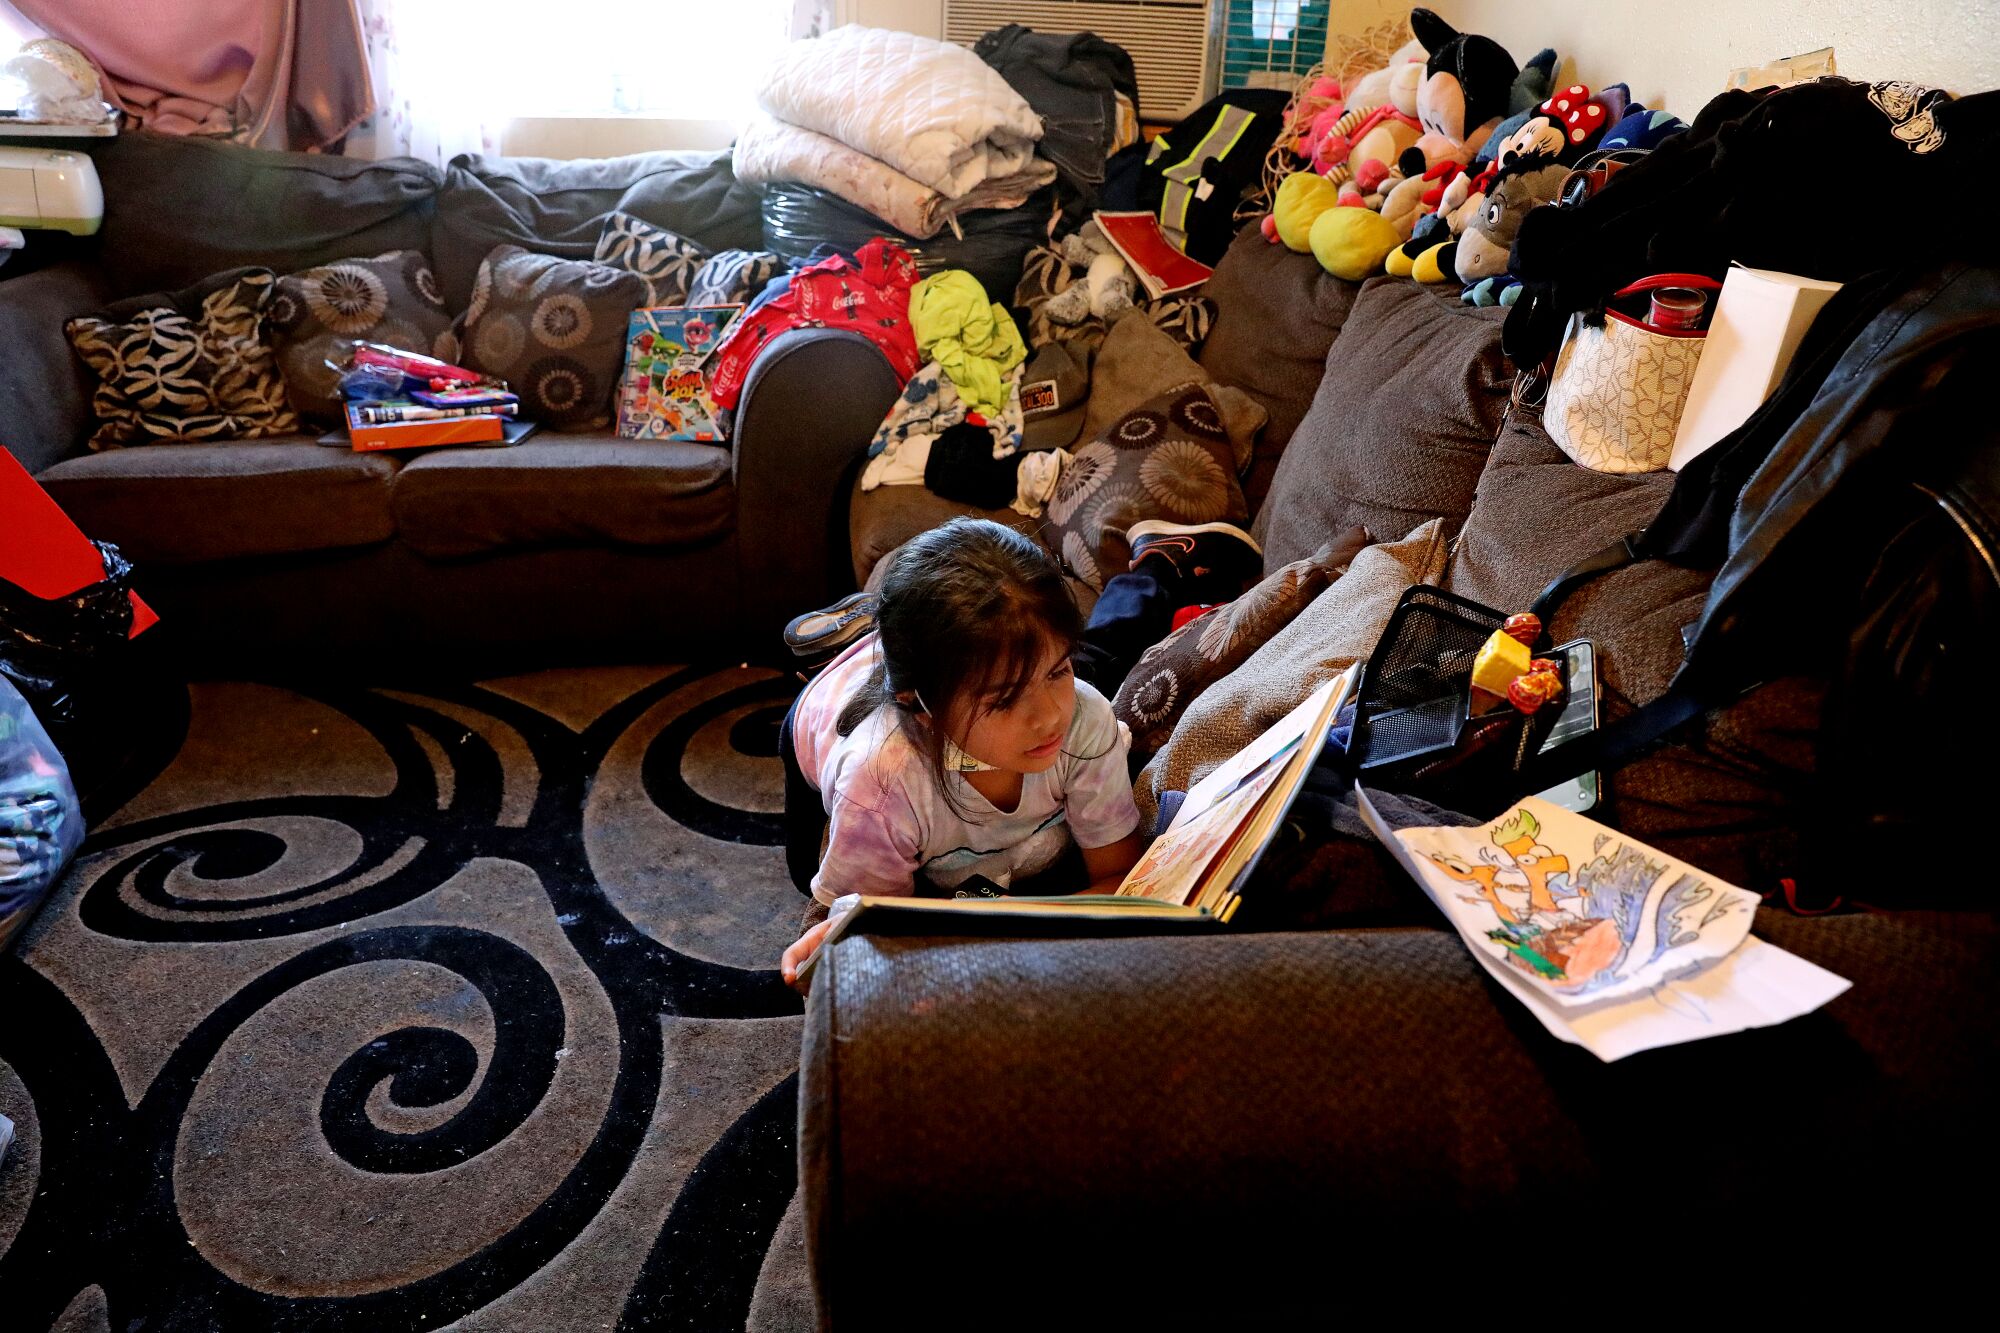 Yaretzi Galicia, 7, reads in the living area of the family's one-bedroom apartment in Pico-Union.